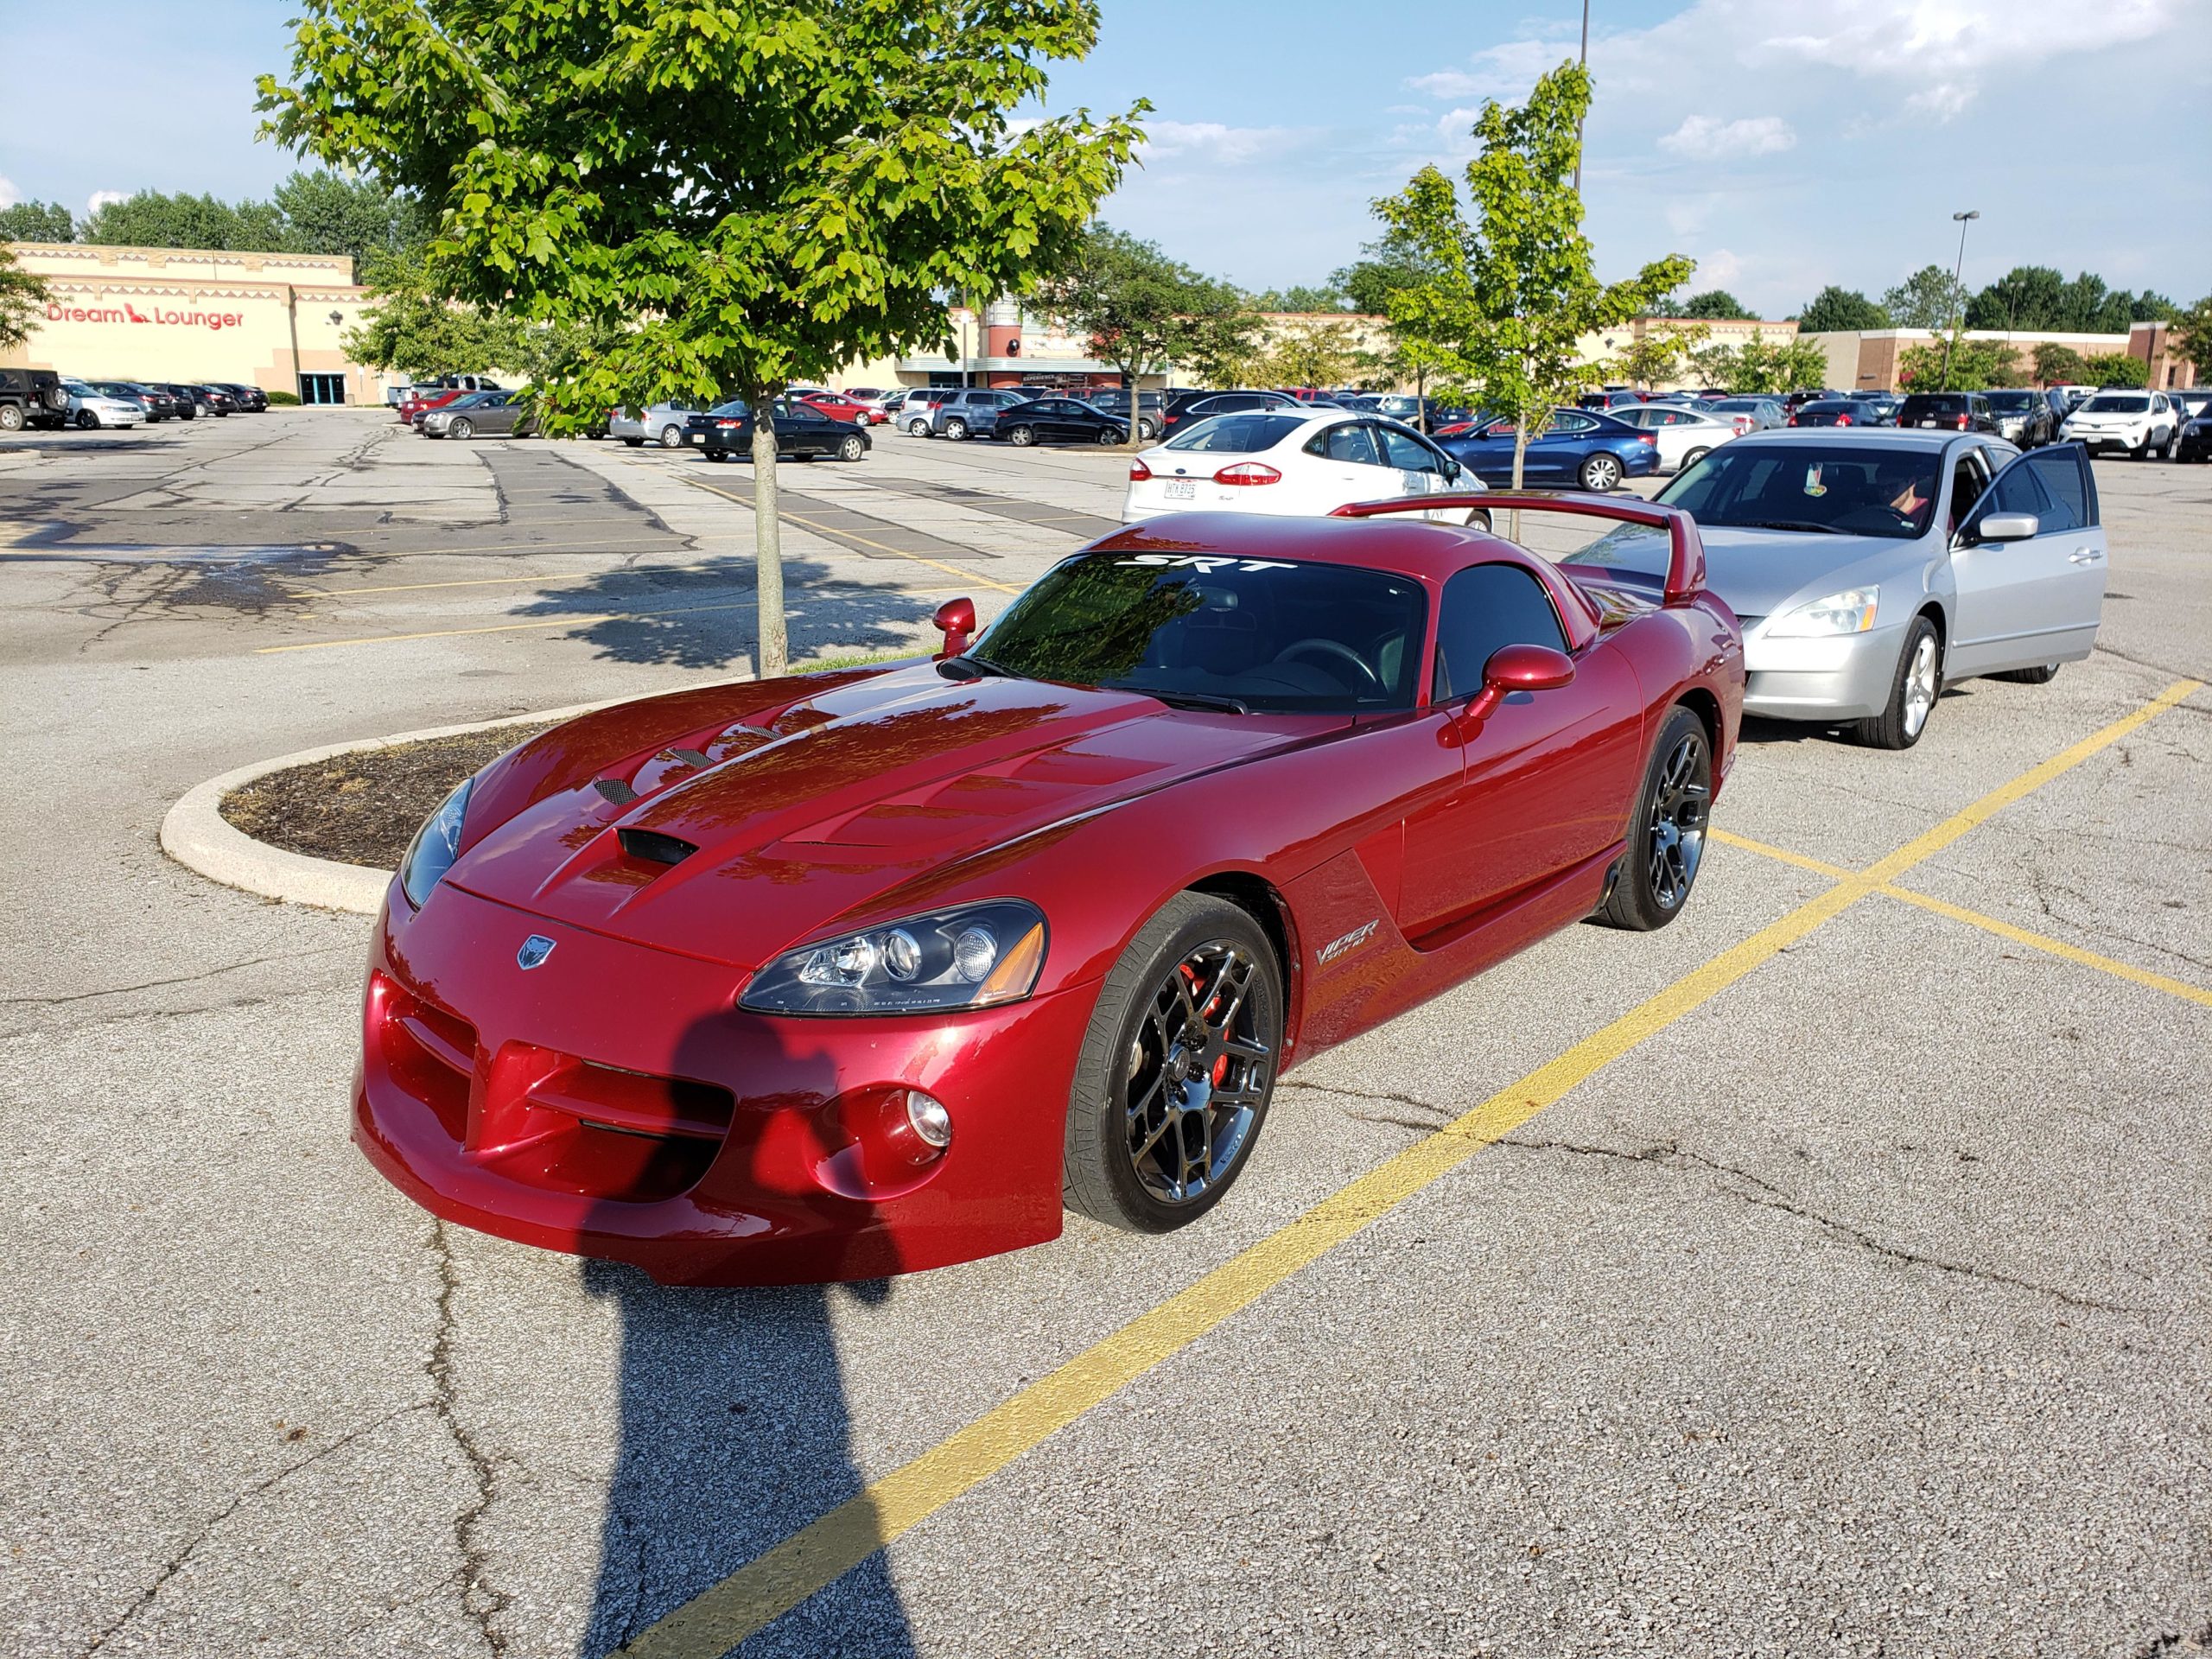 Spotted a viper out in the wild